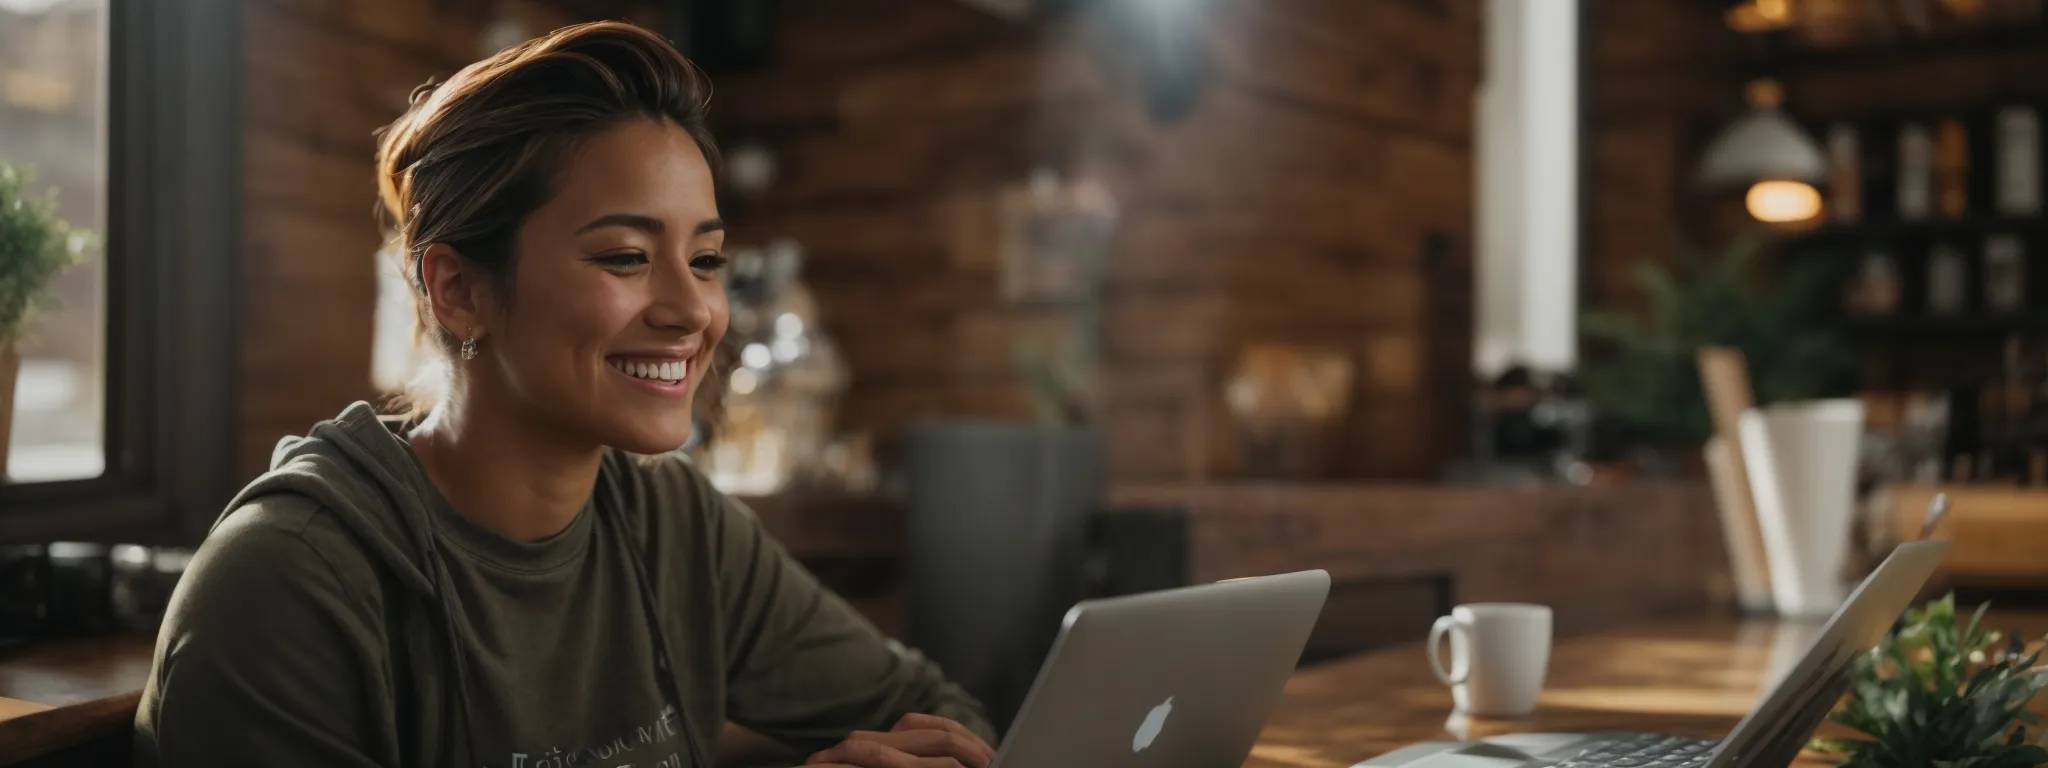 a small business owner smiles while crafting a personalized email on a laptop in a cozy, sunlit local coffee shop.